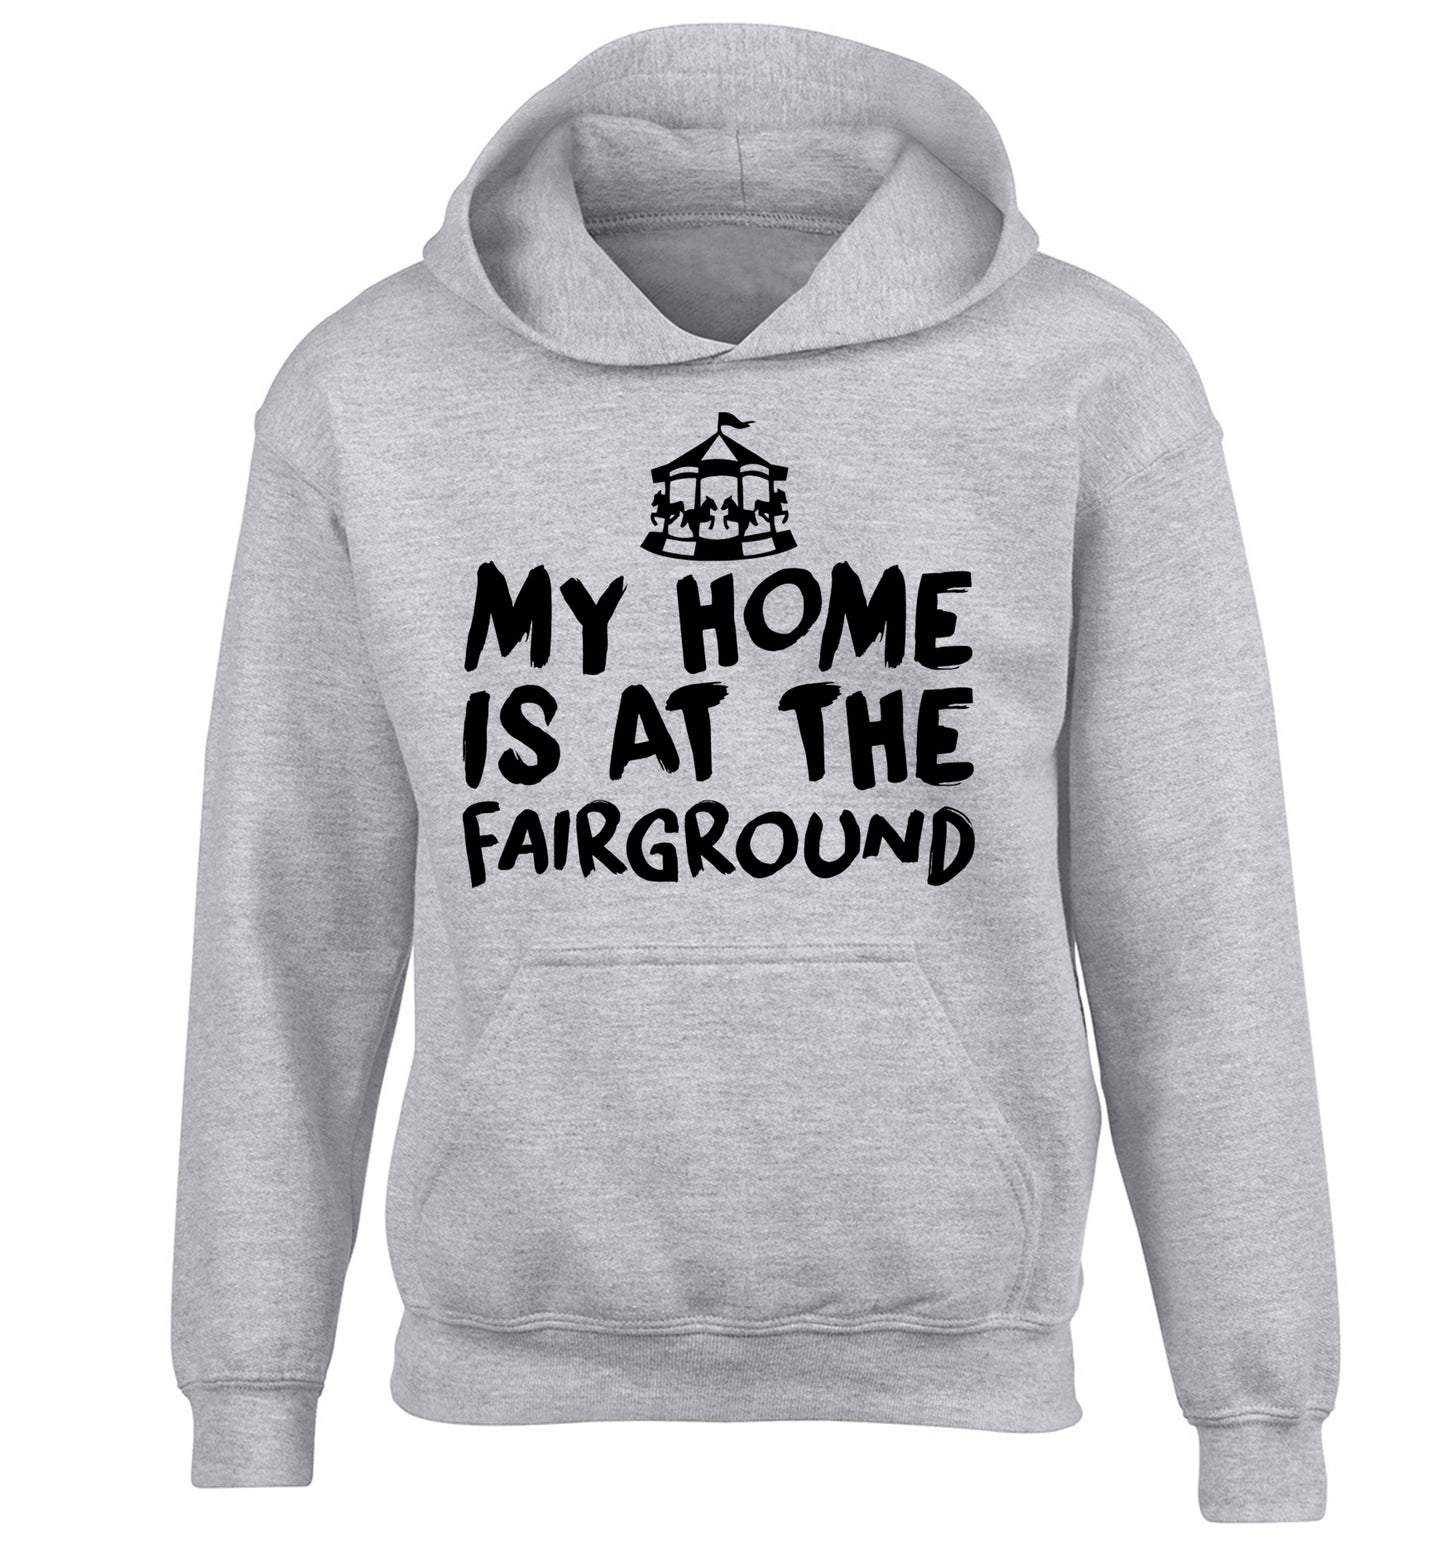 My home is at the fairground children's grey hoodie 12-14 Years